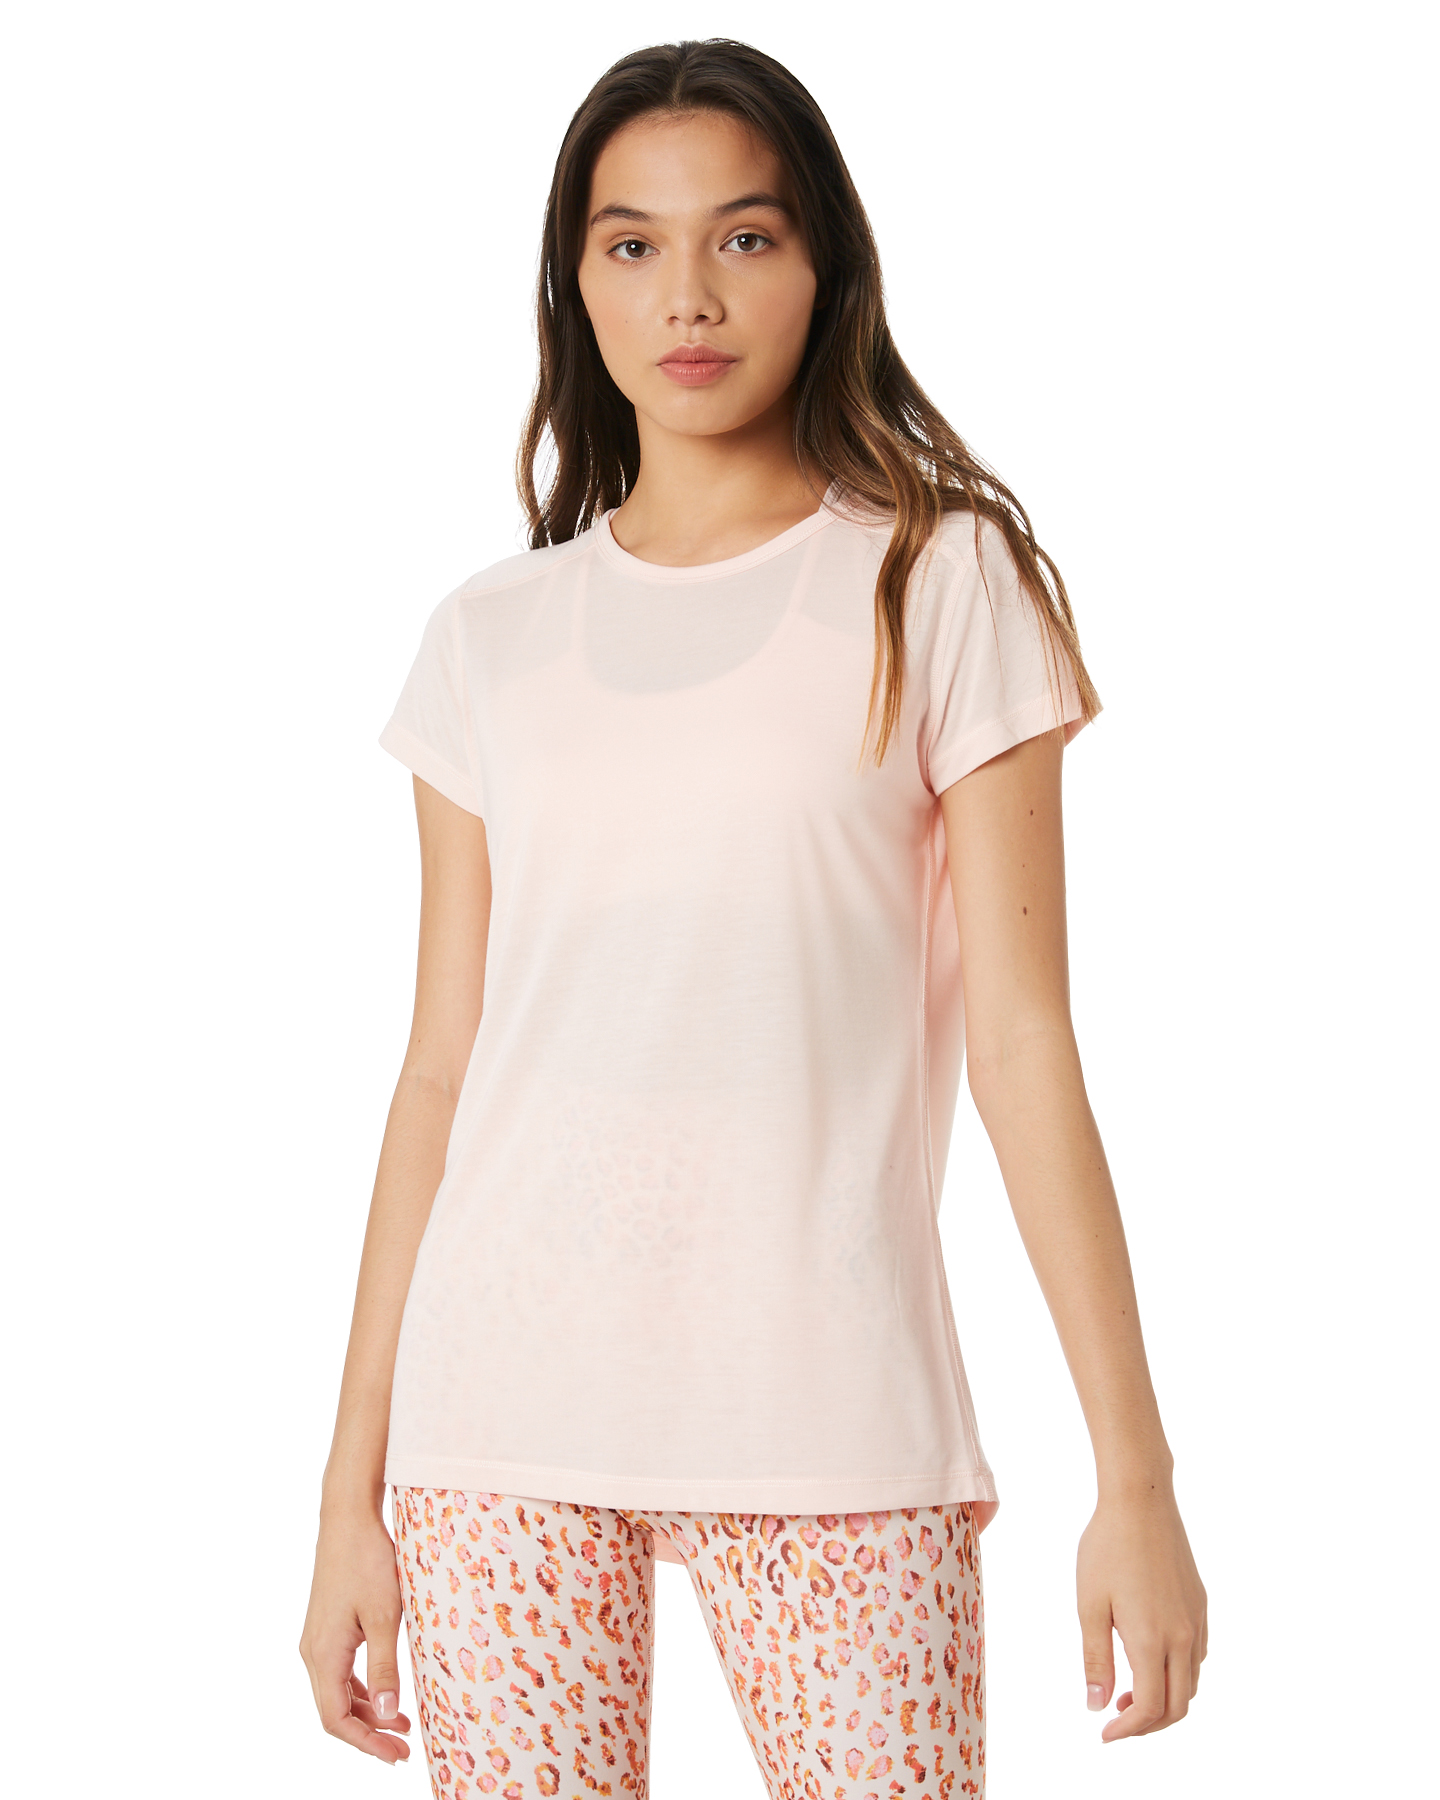 Lorna Jane Classic Active Tee - Dusty Pink | SurfStitch